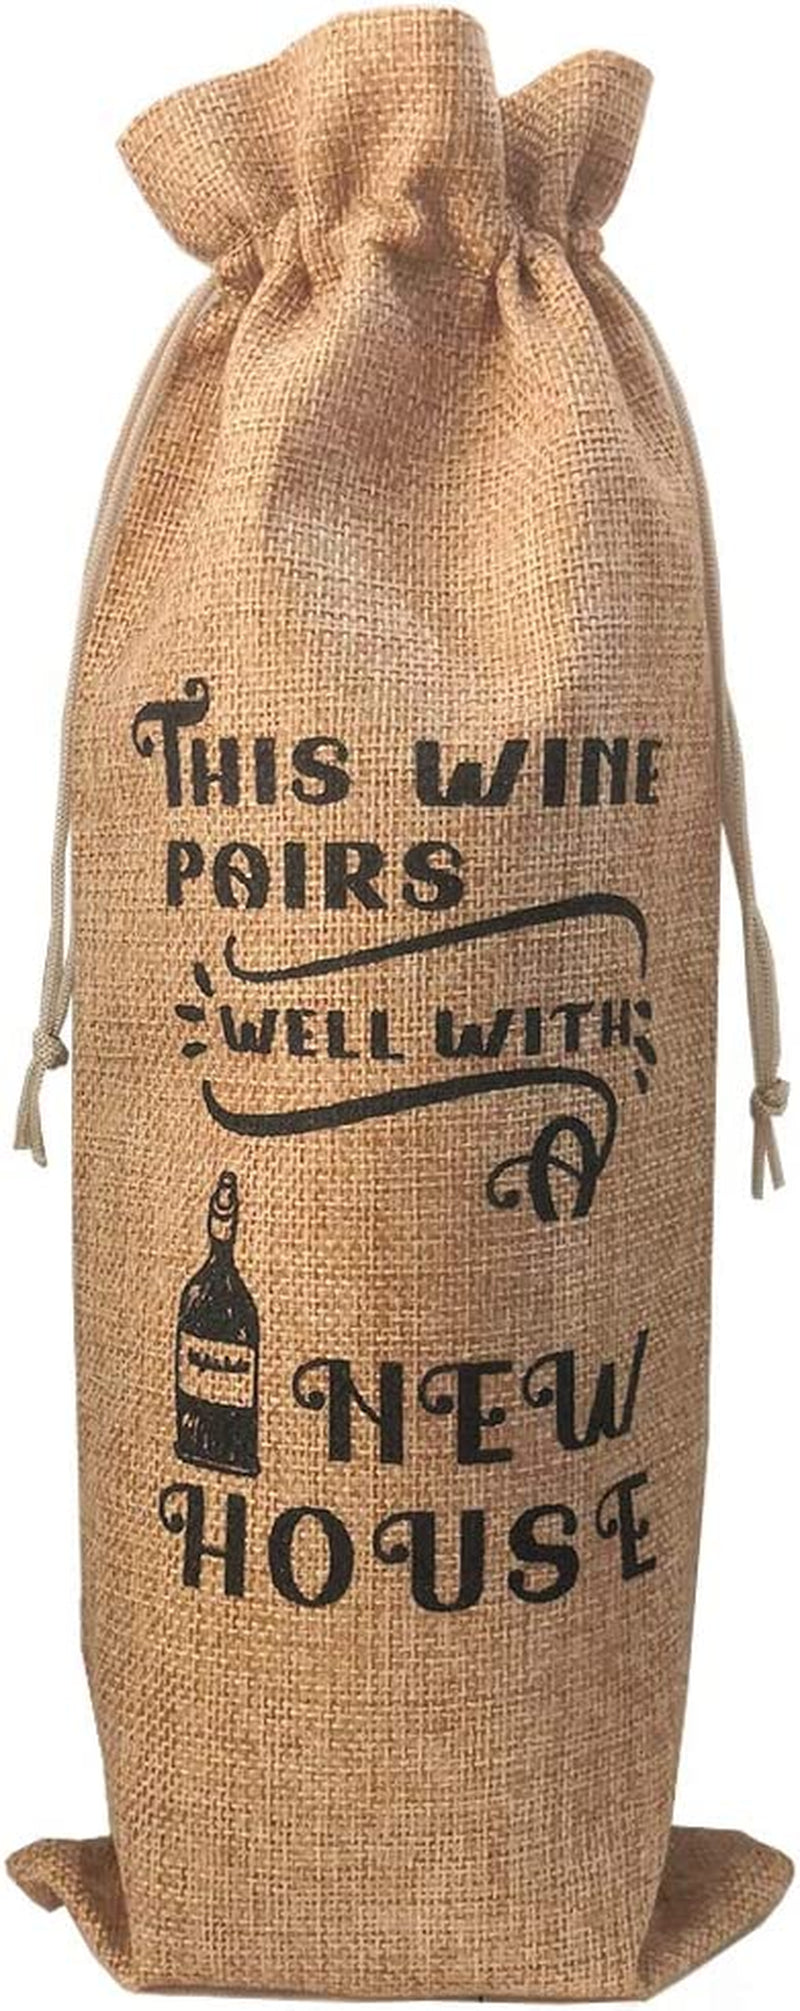 New House Gift Wine Bag, Closing Gifts for Buyers, Closing Gifts Real Estate for Clients, Burlap